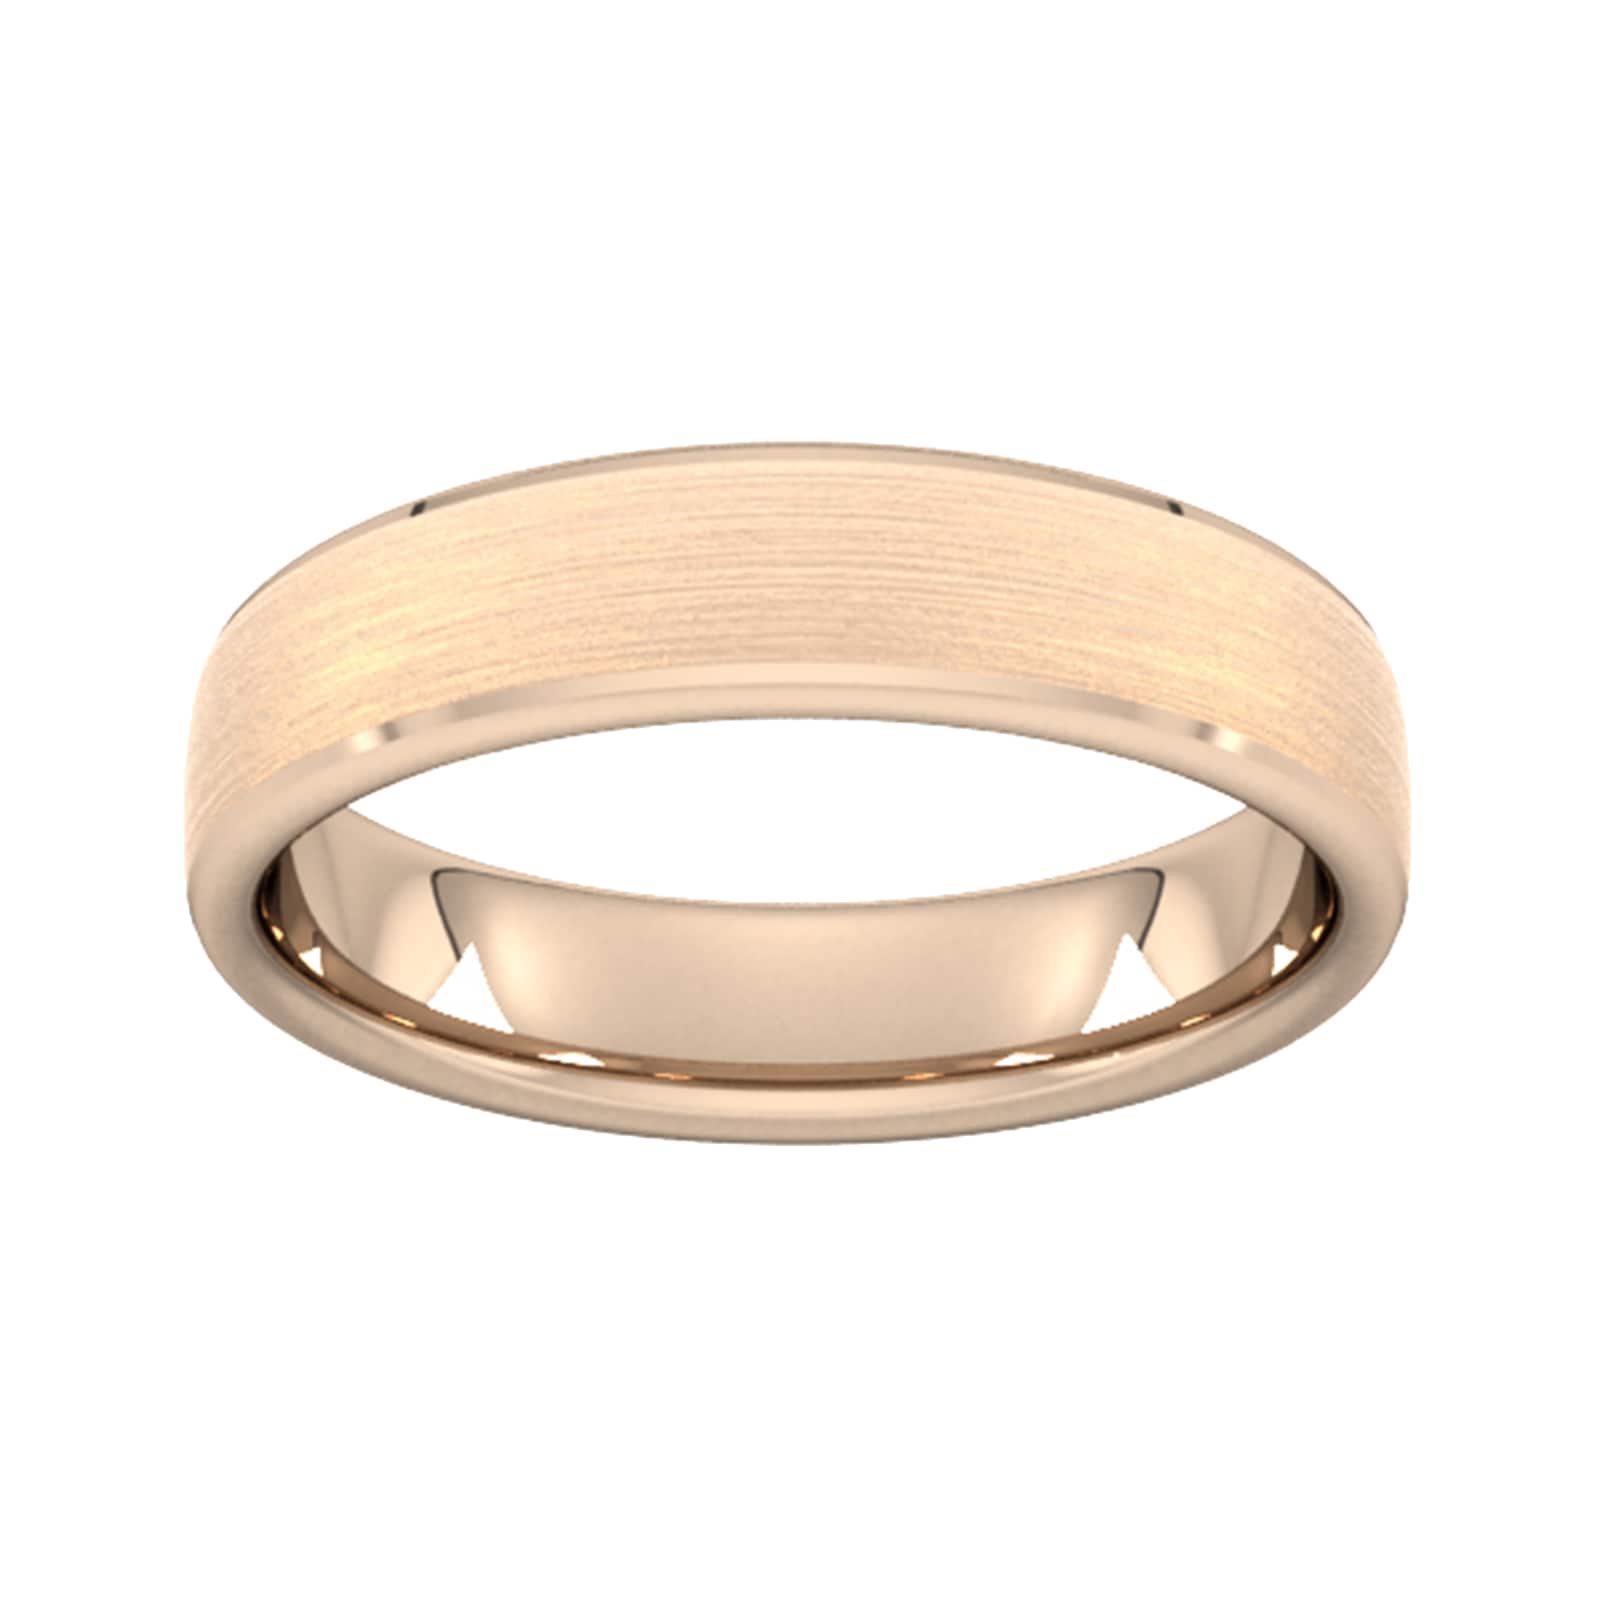 5mm D Shape Heavy Polished Chamfered Edges With Matt Centre Wedding Ring In 9 Carat Rose Gold - Ring Size I